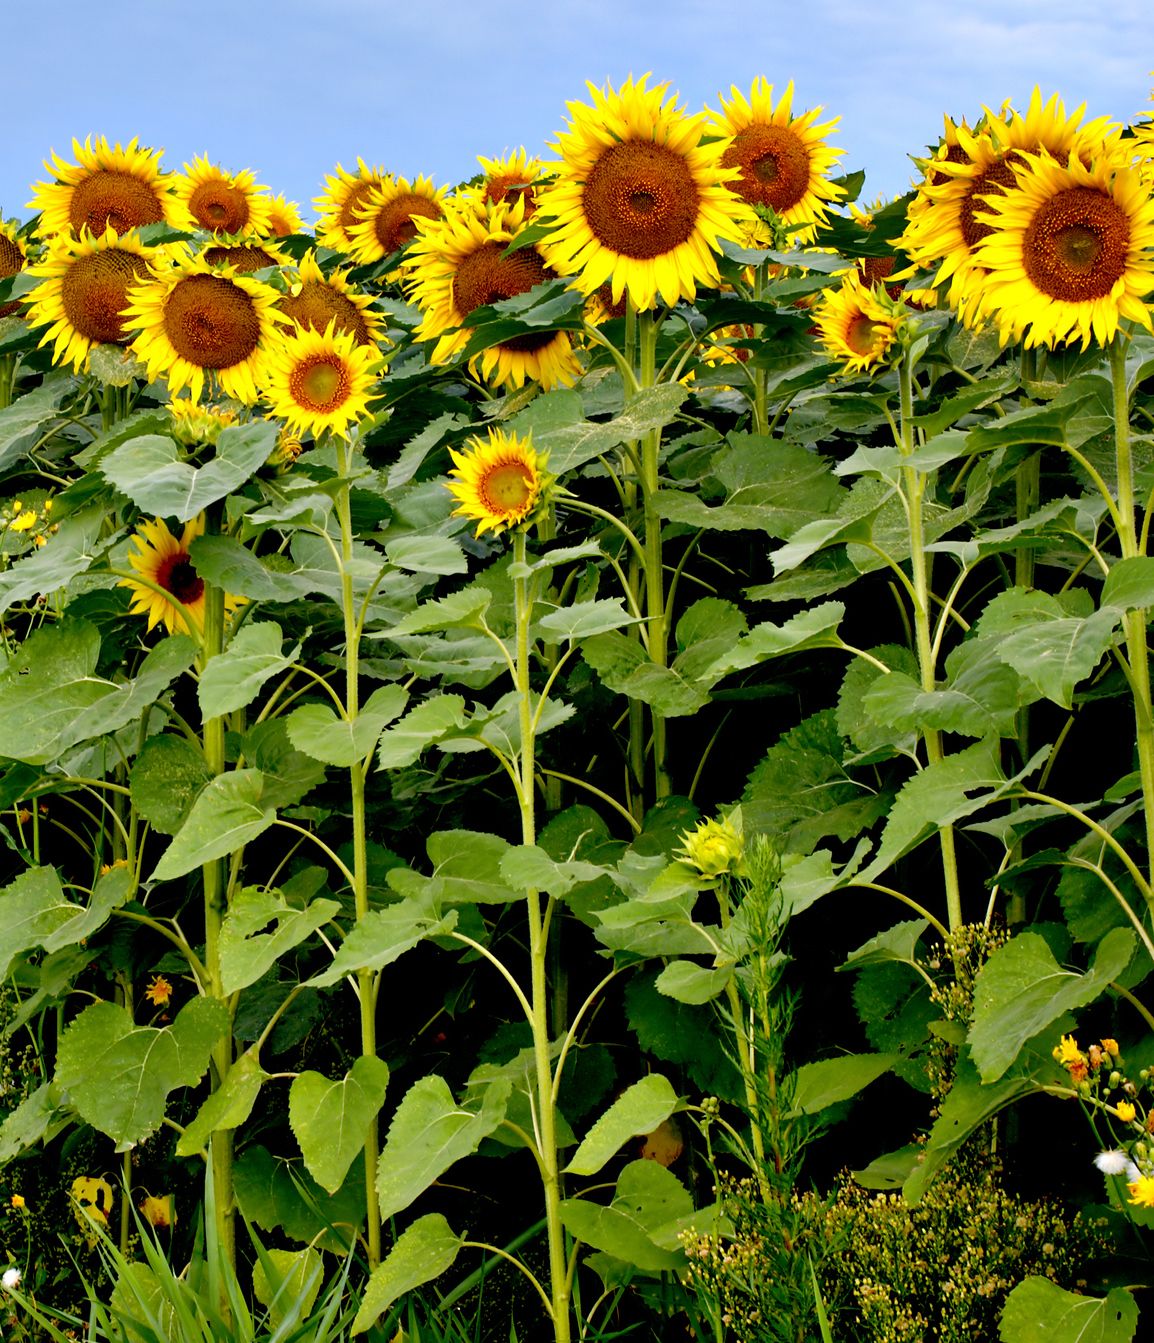 15 different types of sunflowers - sunflower varieties to plant